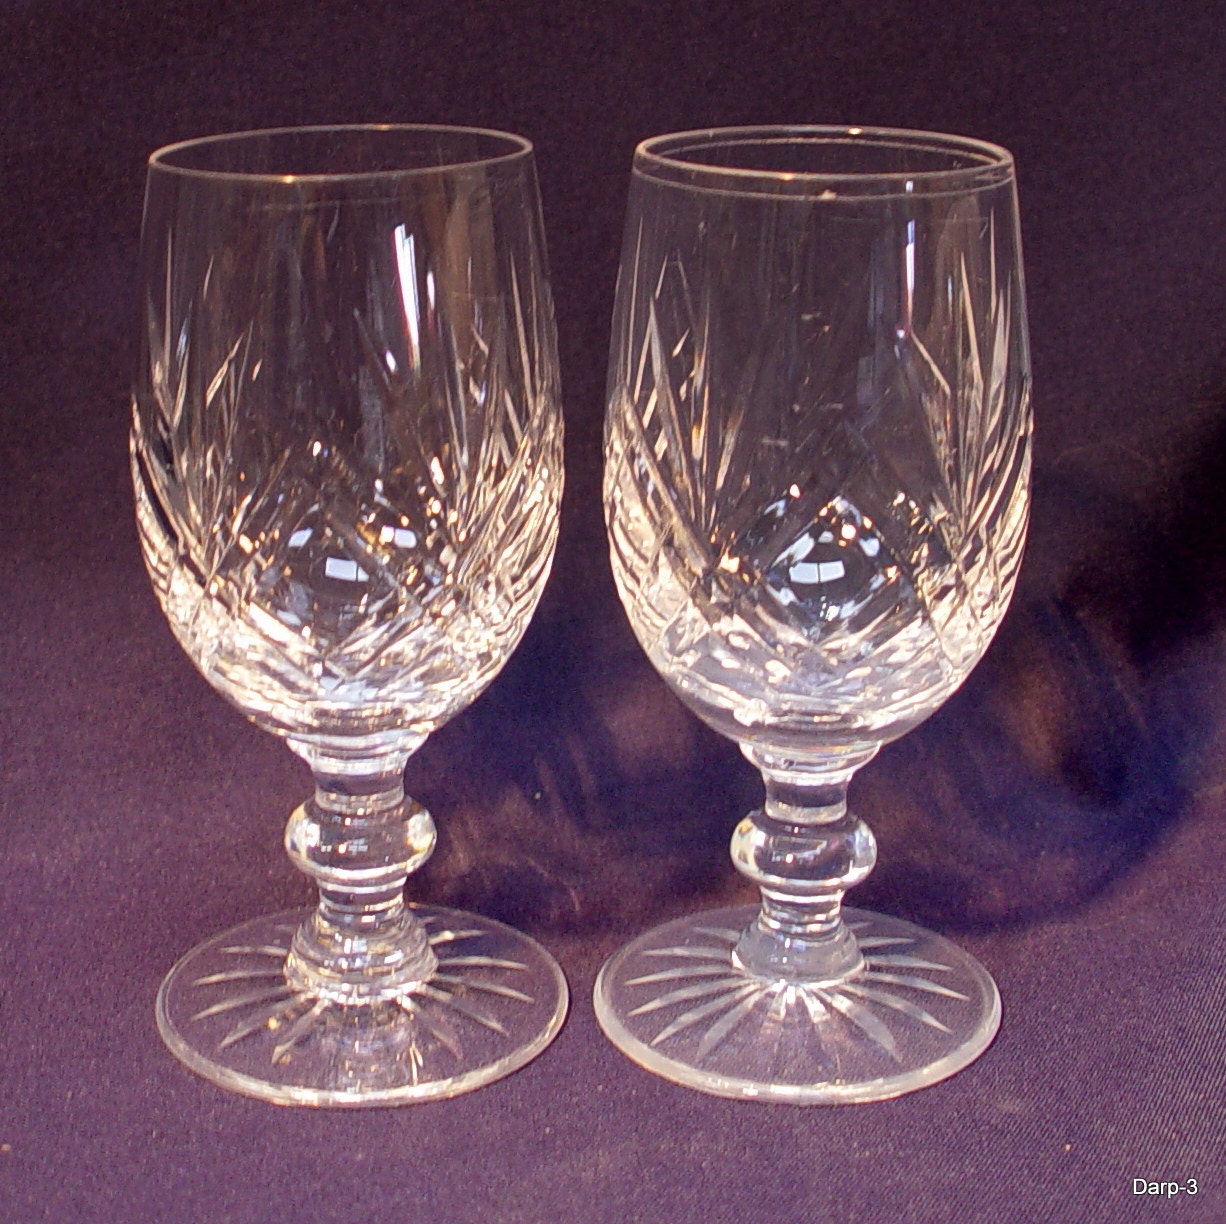 2 Vintage Cut Crystal Glass 80 ml Sherry Glasses with by darp3